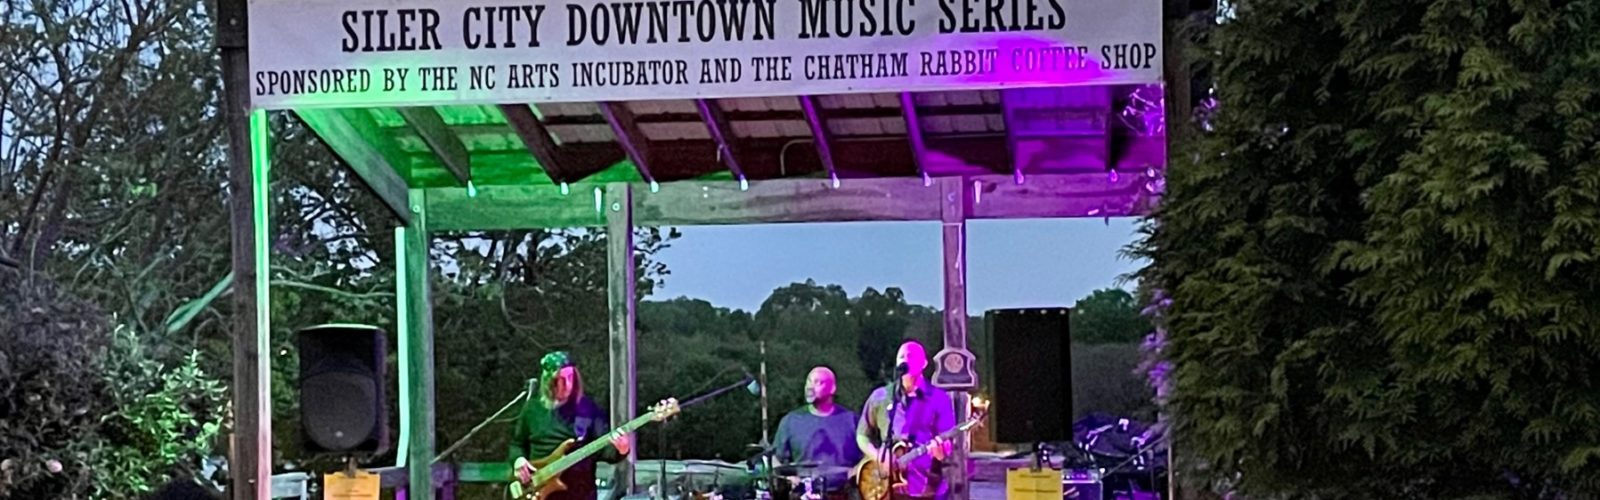 Go See This: 2022 Siler City Downtown Music Series